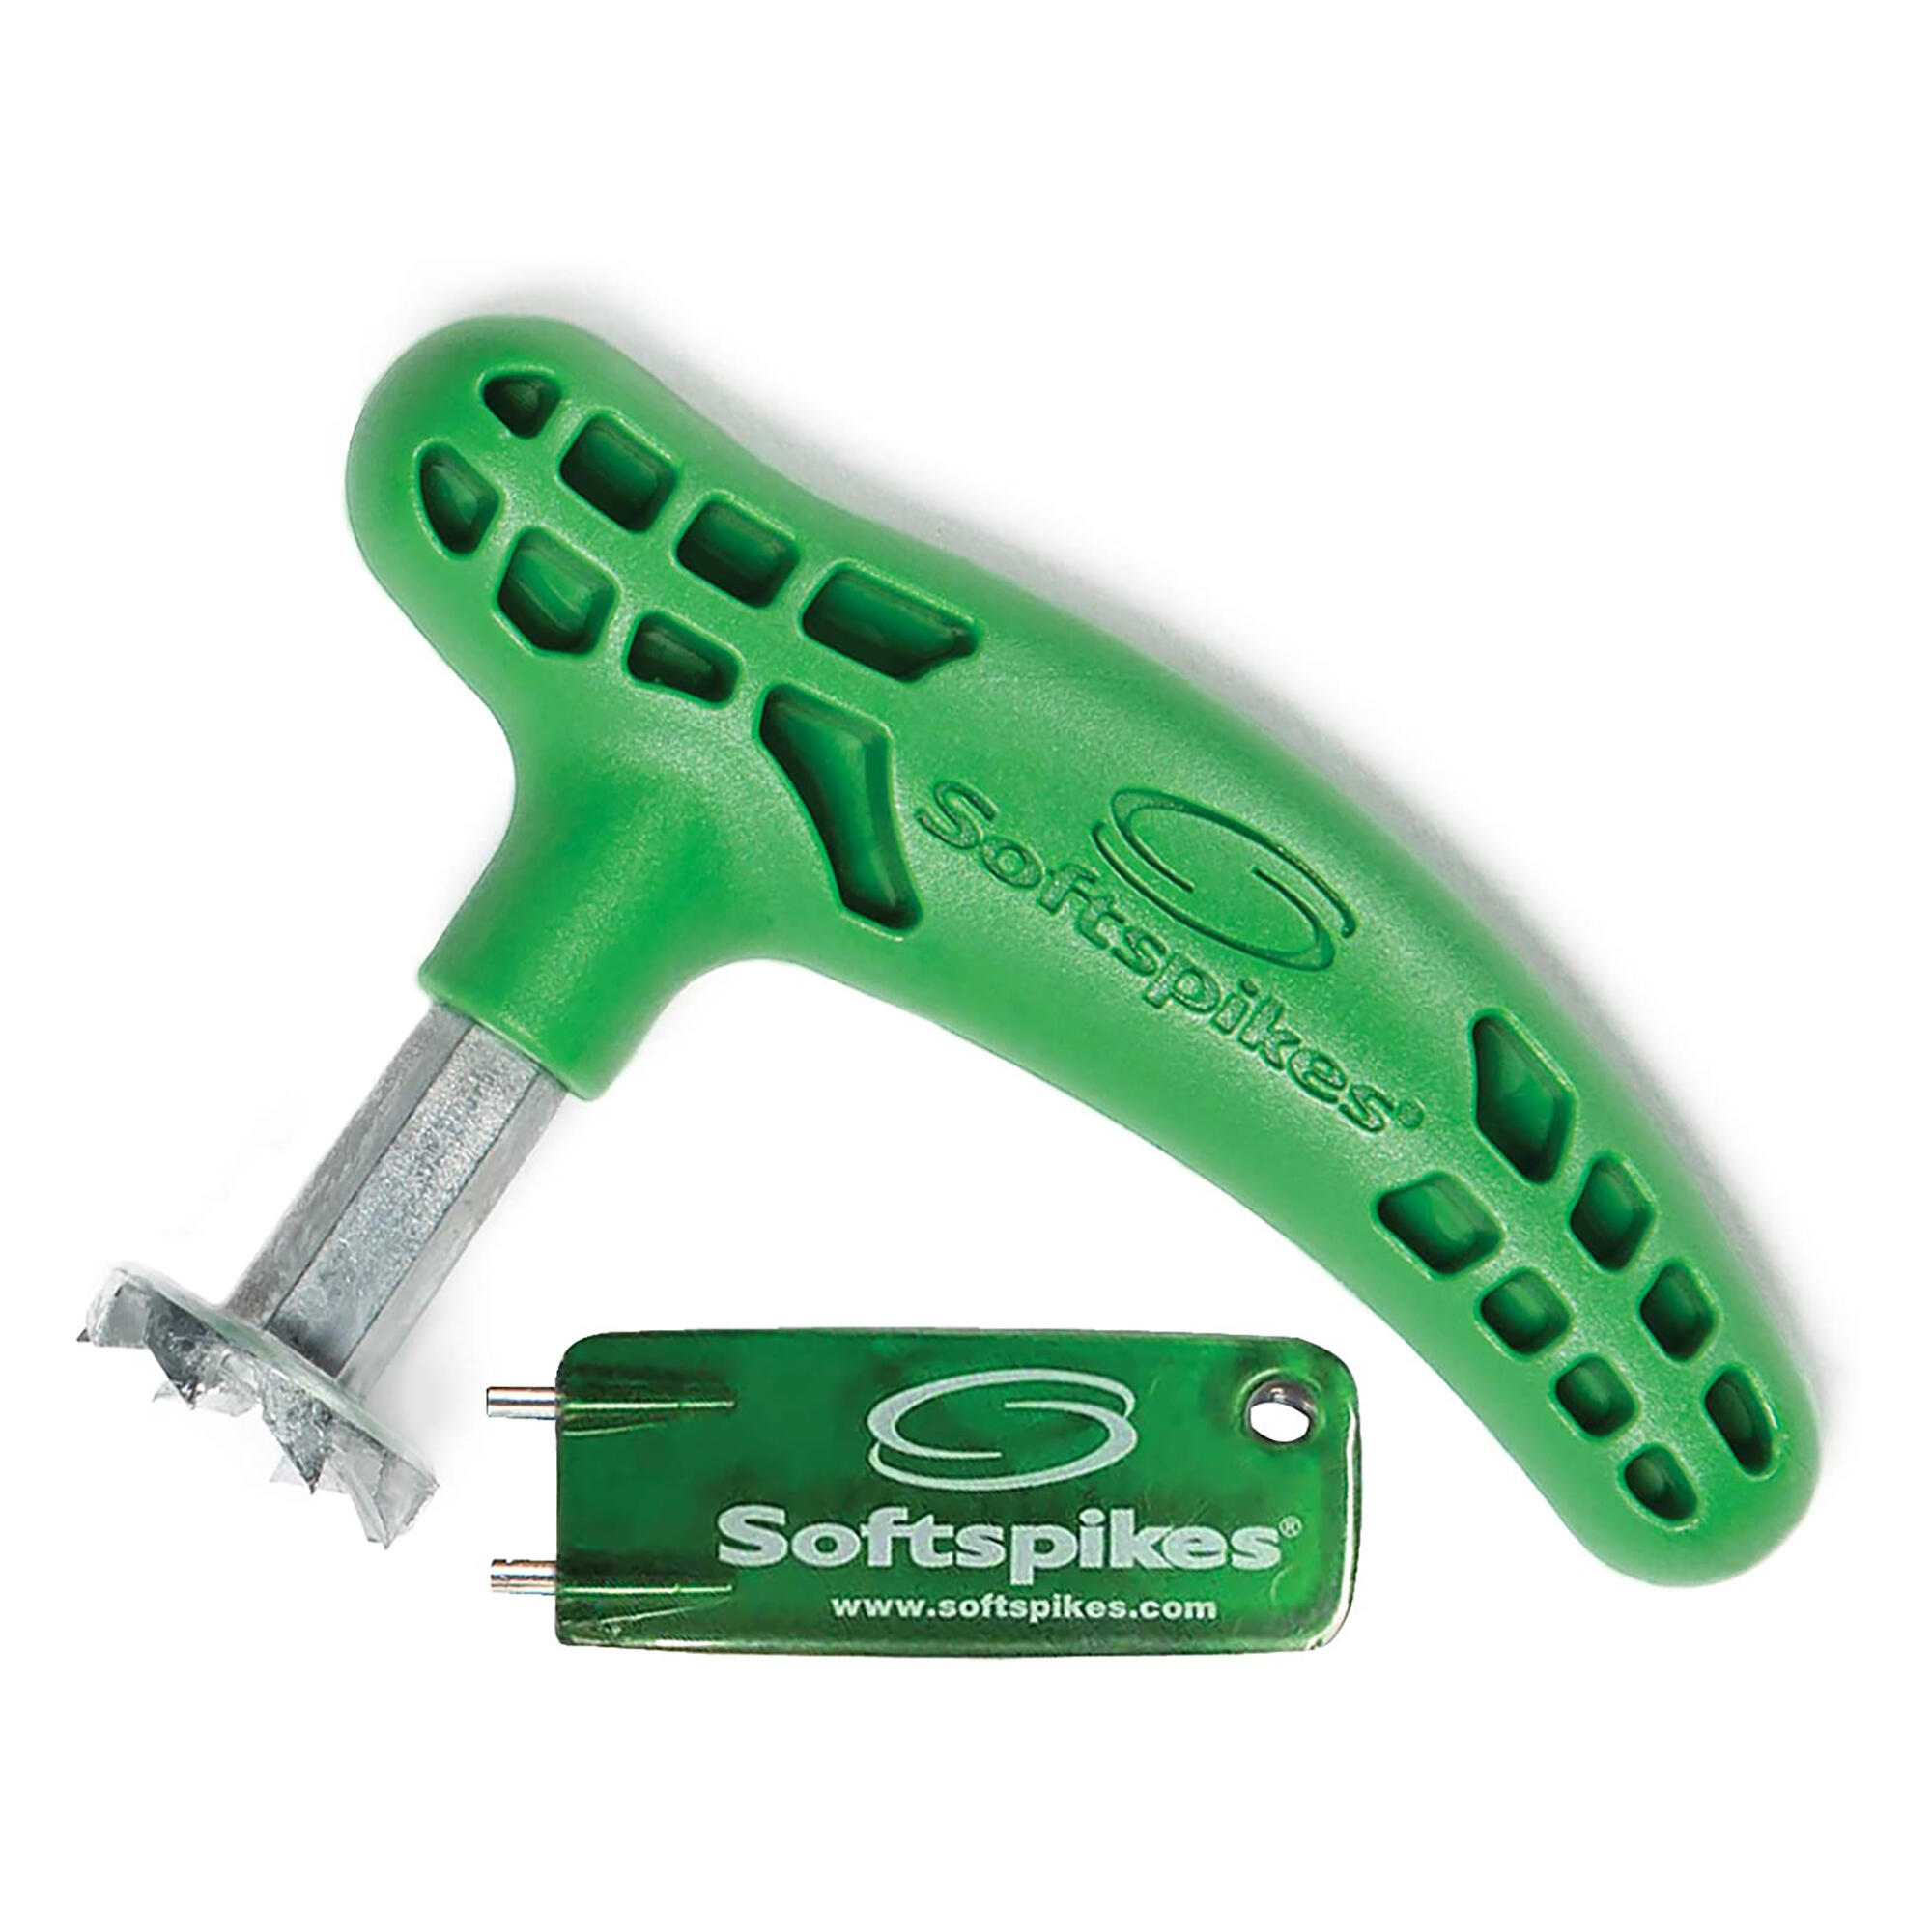 SOFTSPIKES Universal spike wrench for golf shoes